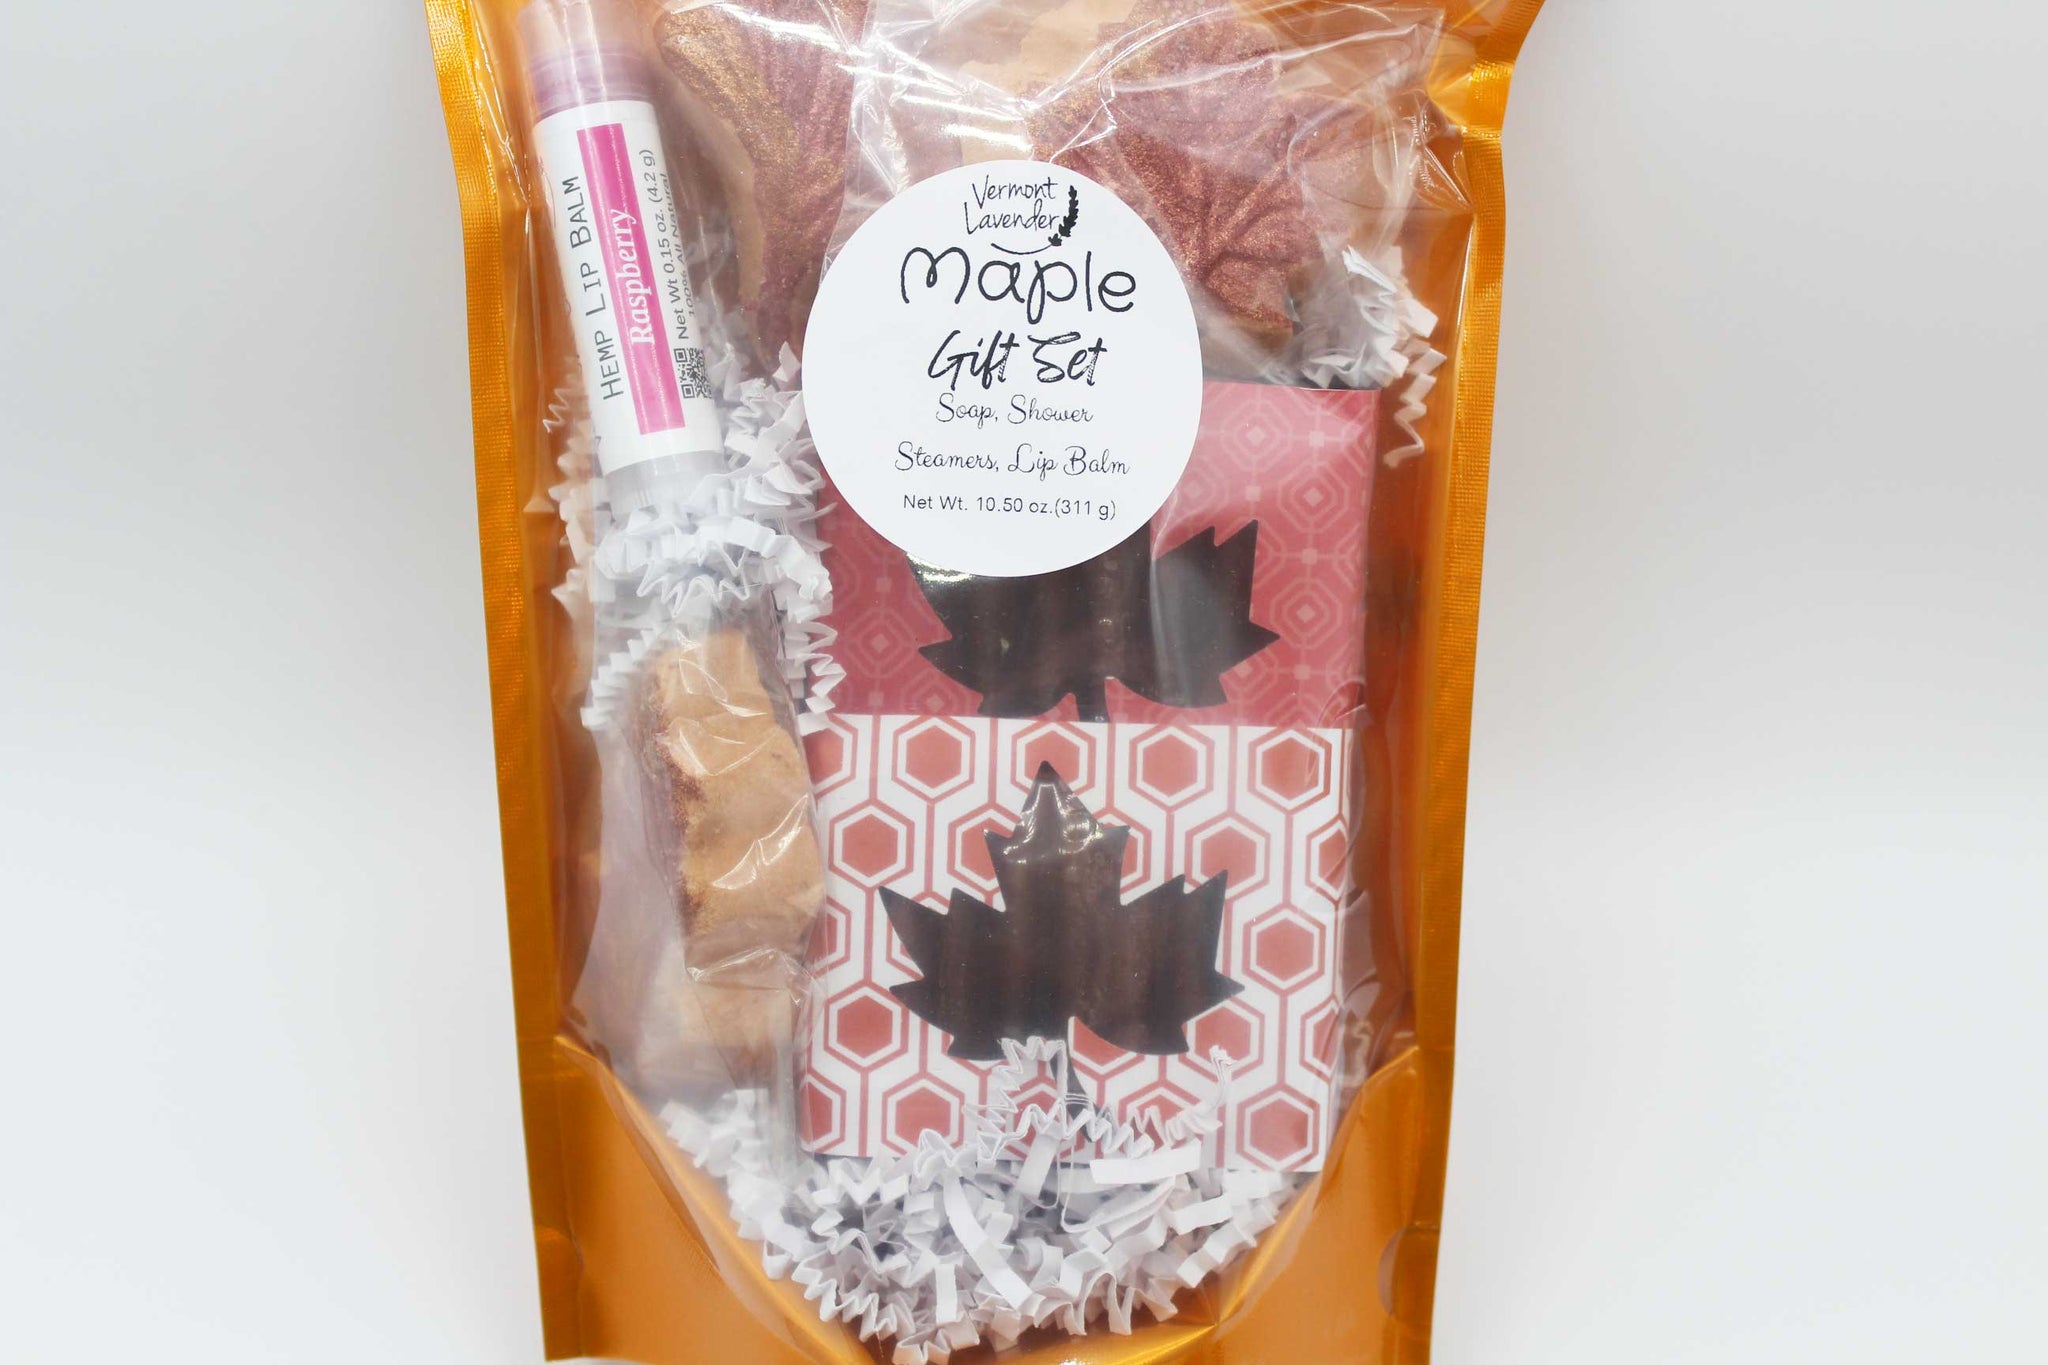 Maple Autumn scents of orange, cinnamon and clove with soaps, lip balm and shower steames